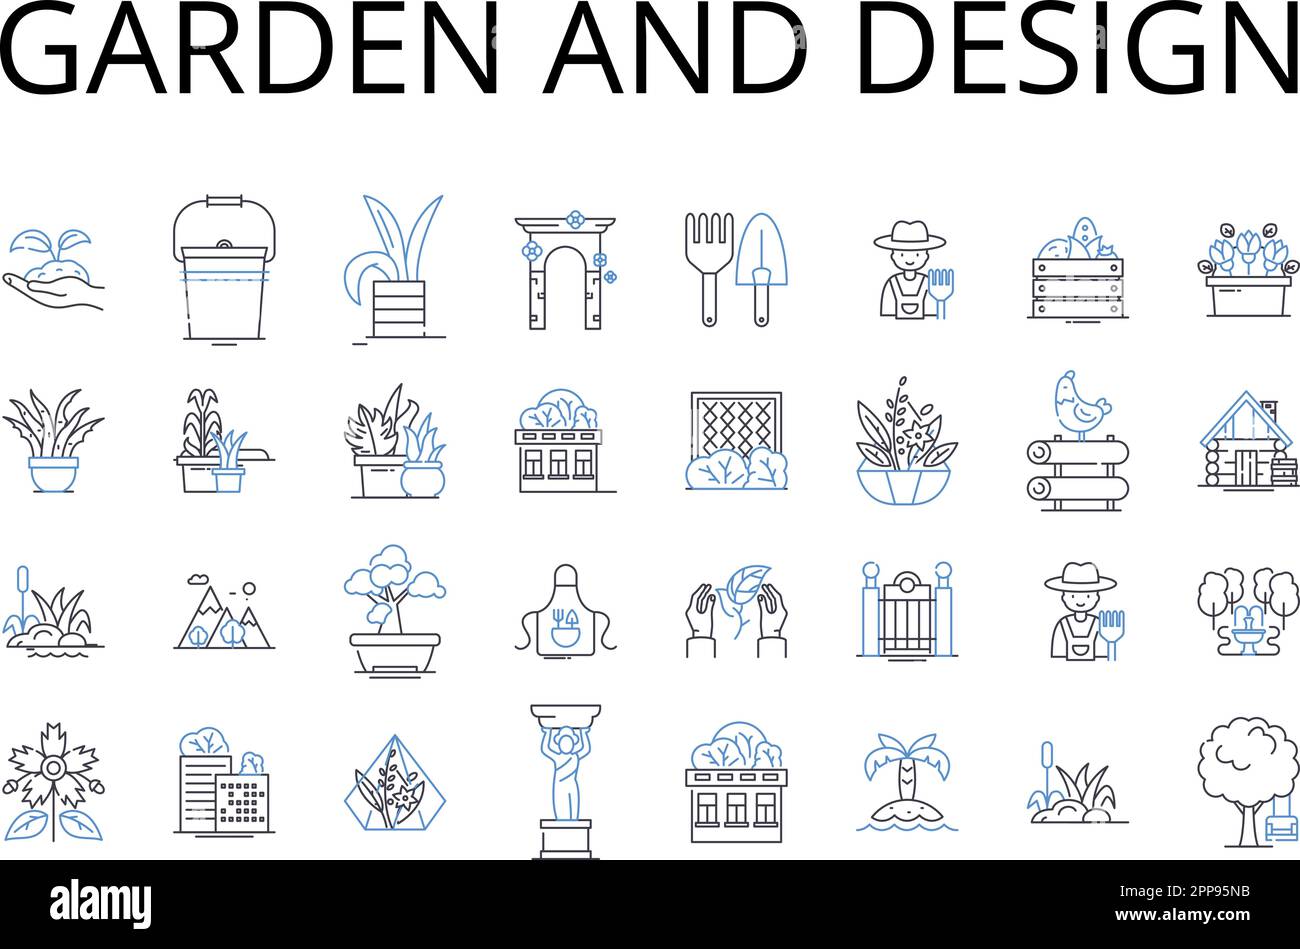 Garden and design line icons collection. Jungle & Greenery, Forest & Organic, Meadow & Landscape, Oasis & Serenity, Zen Garden & Tranquility, Terrace Stock Vector